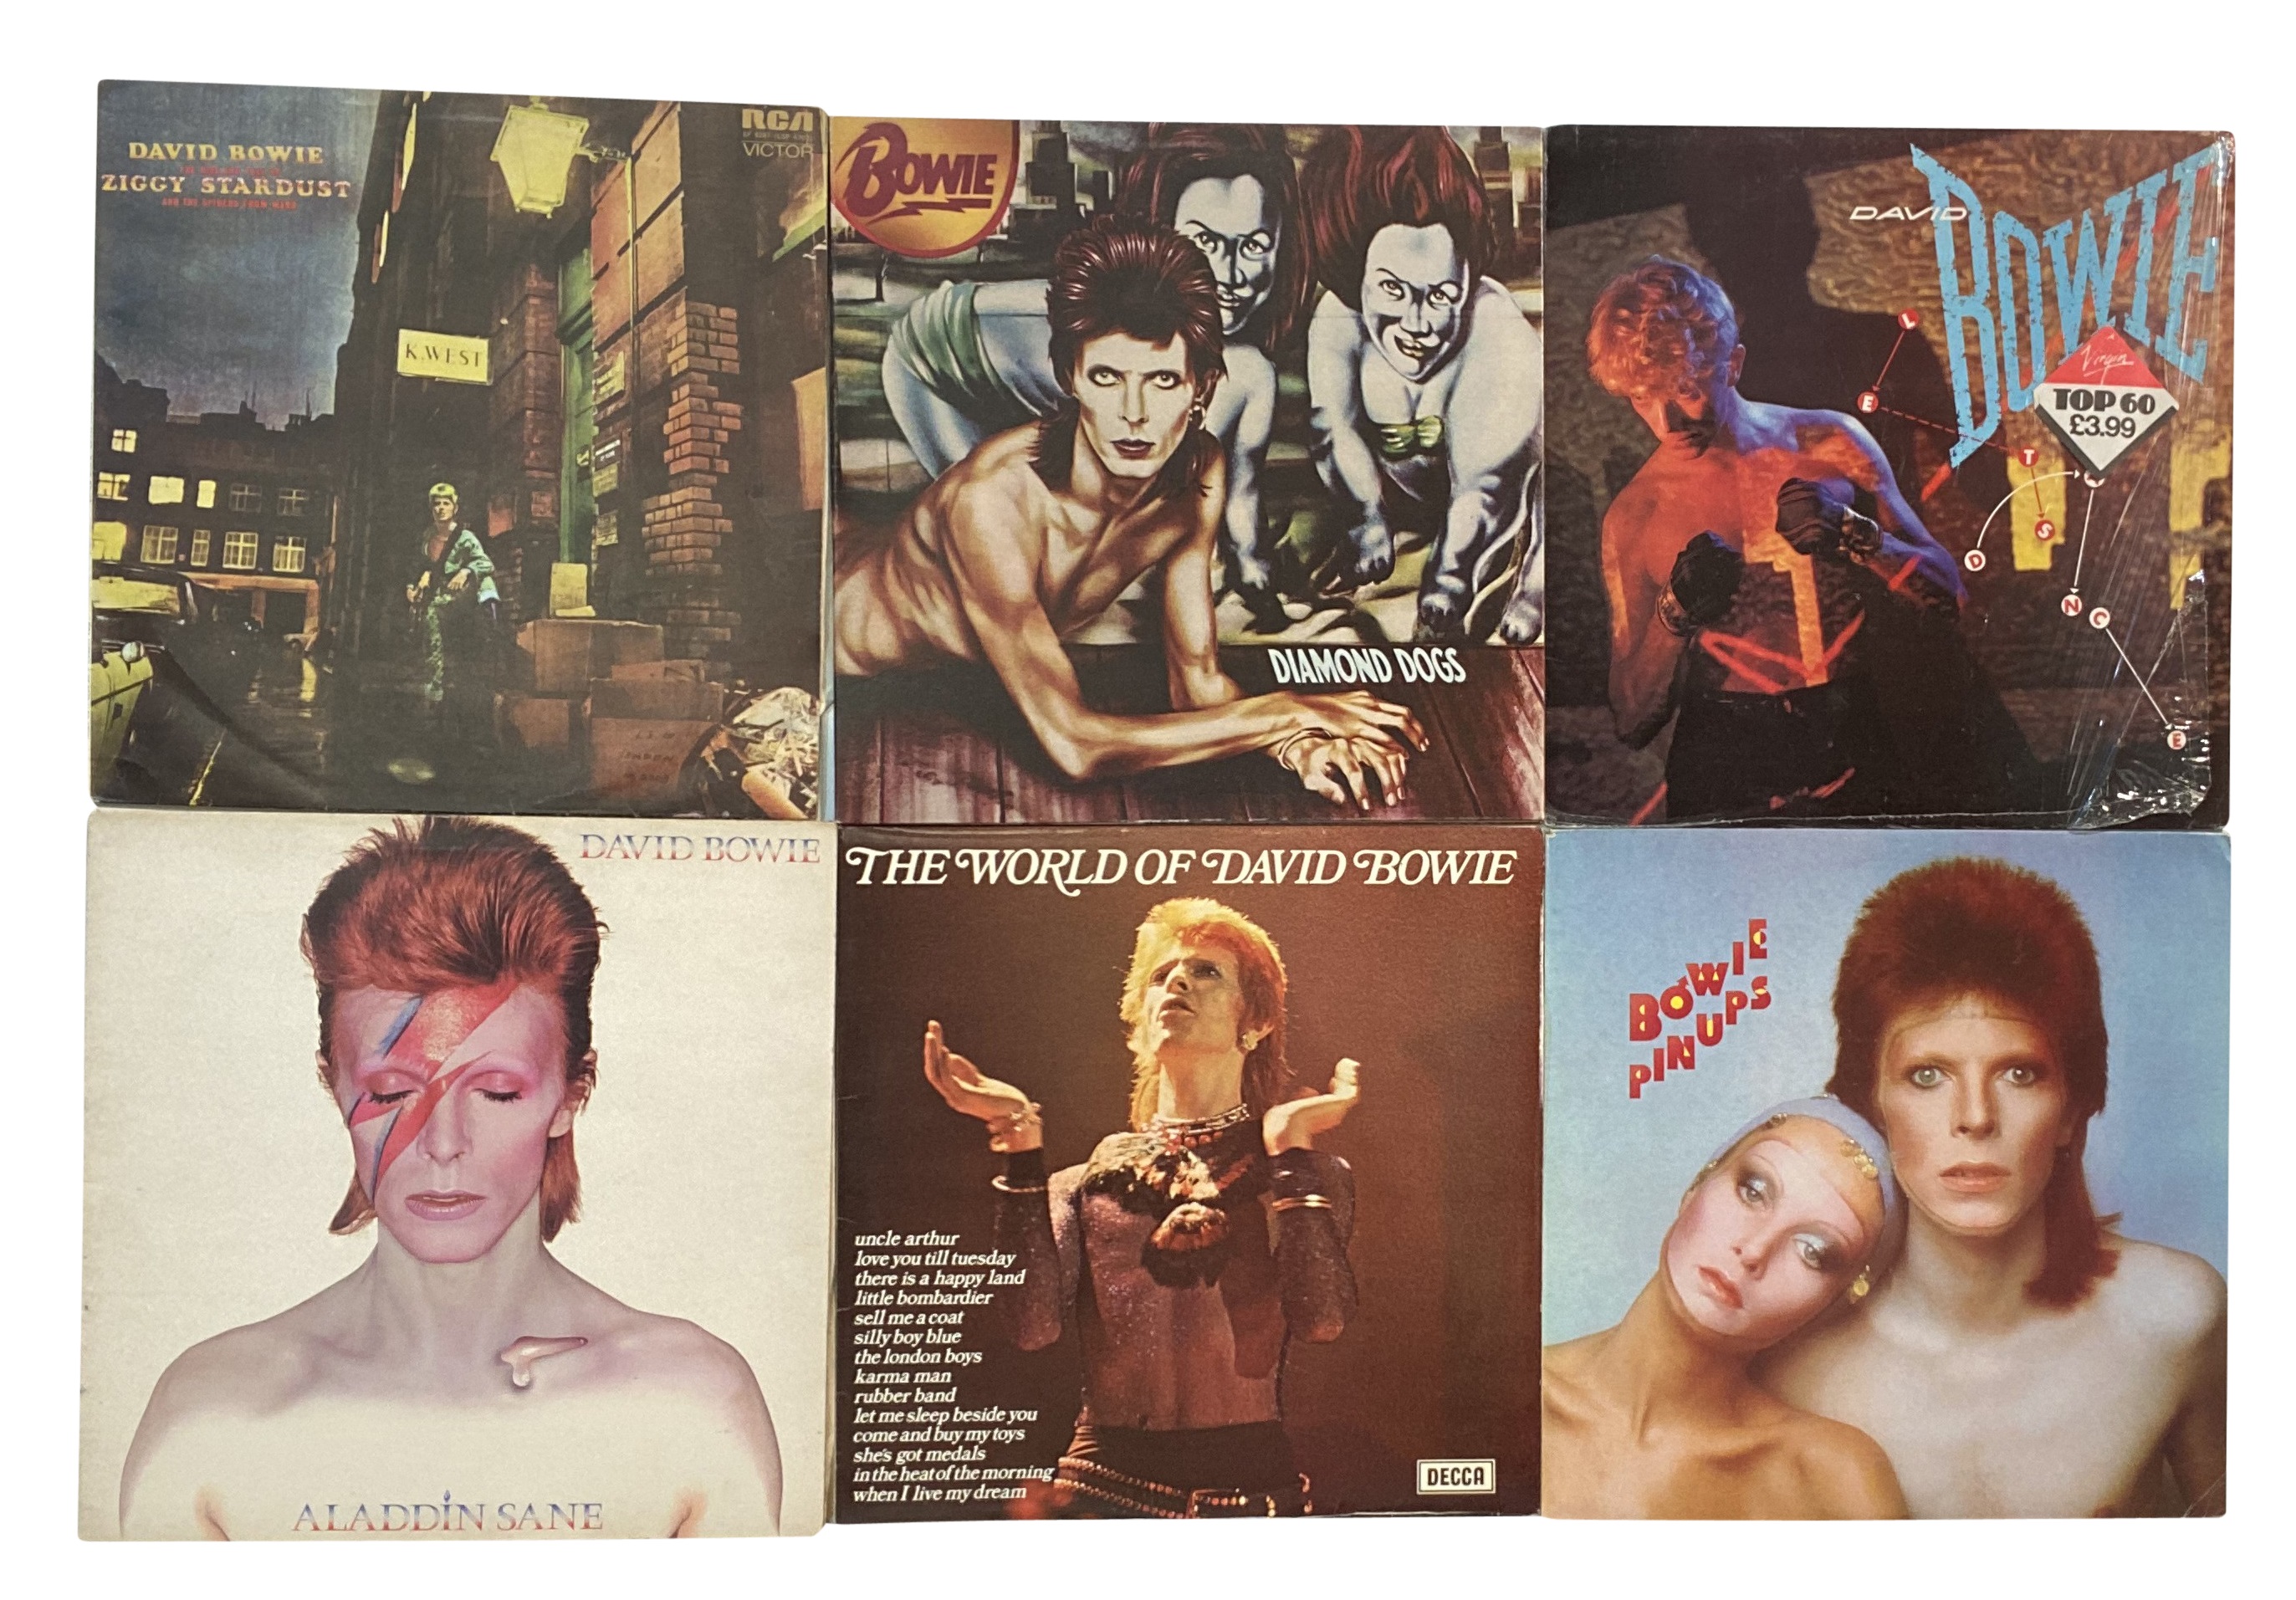 DAVID BOWIE. Excellent instant collection from one of Britain's greatest ever pop stars.